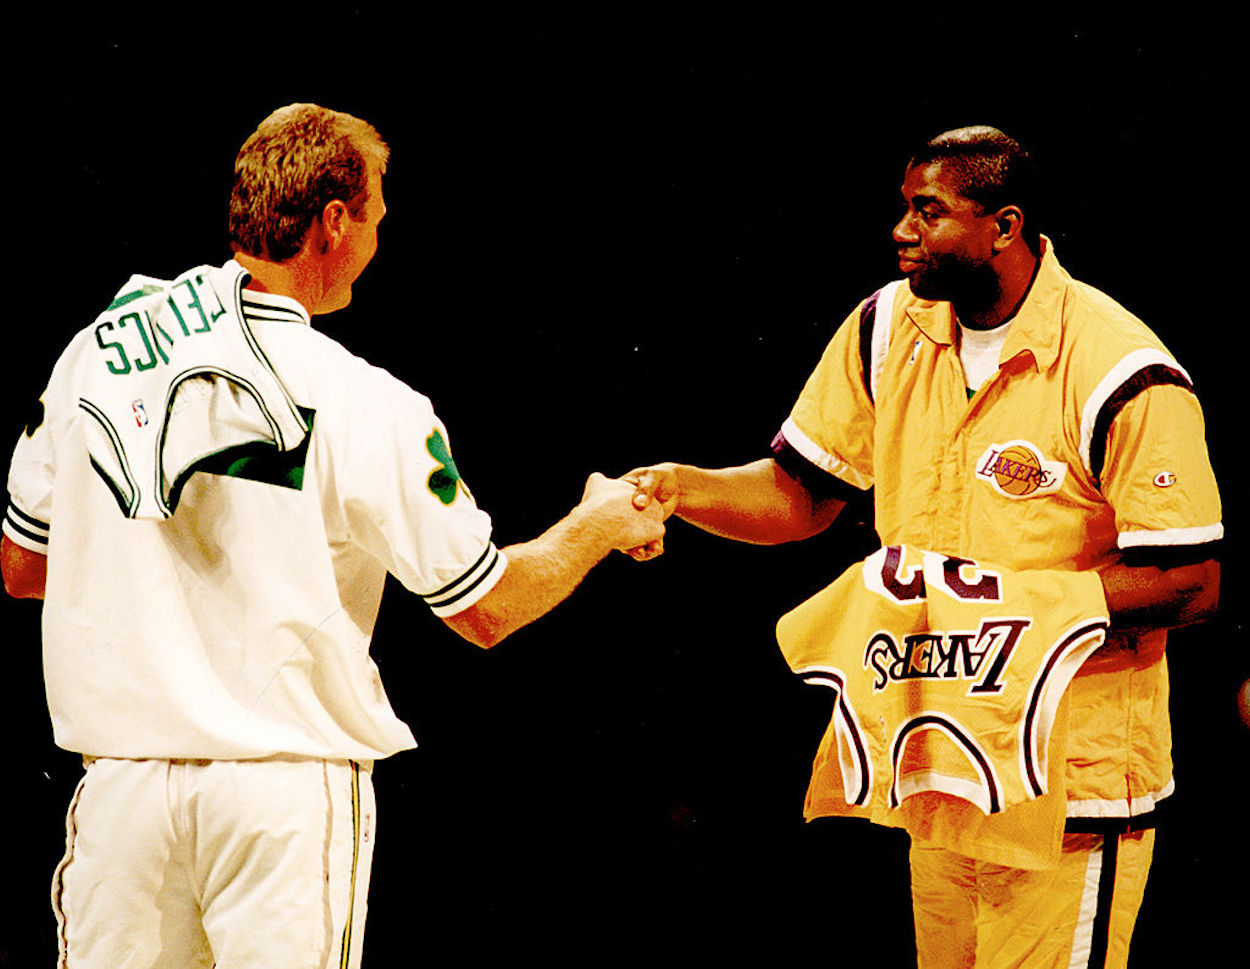 Larry Bird (L) and Magic Johnson (R) shake hands ahead of a 1993 game.